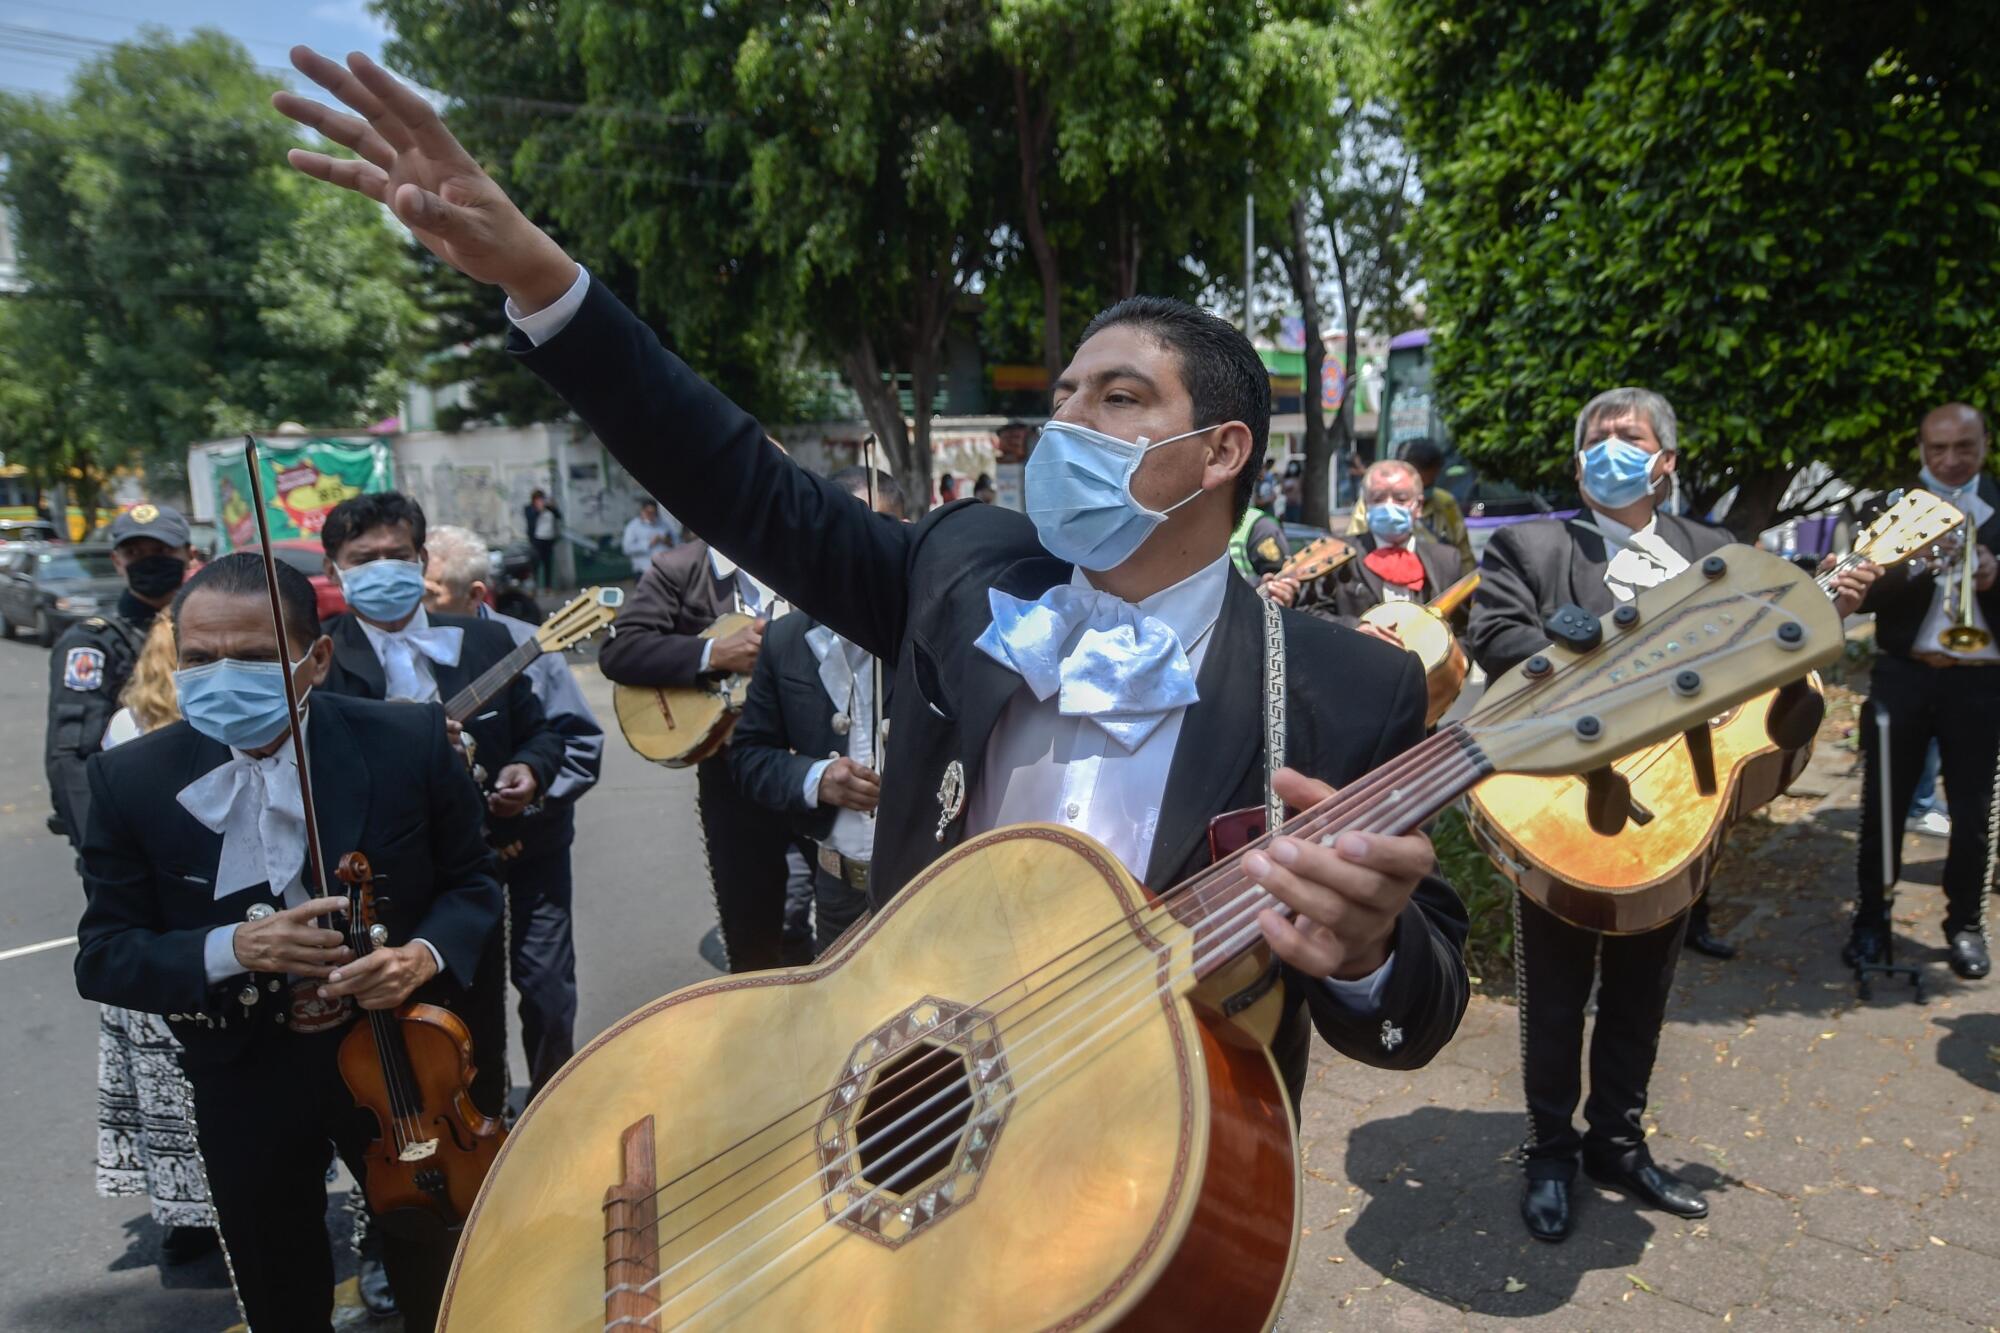 Masked mariachis serenade the National Institute of Respiratory Diseases in Mexico City on April 7 as a gesture of encouragement for COVID-19 patients and caregivers.